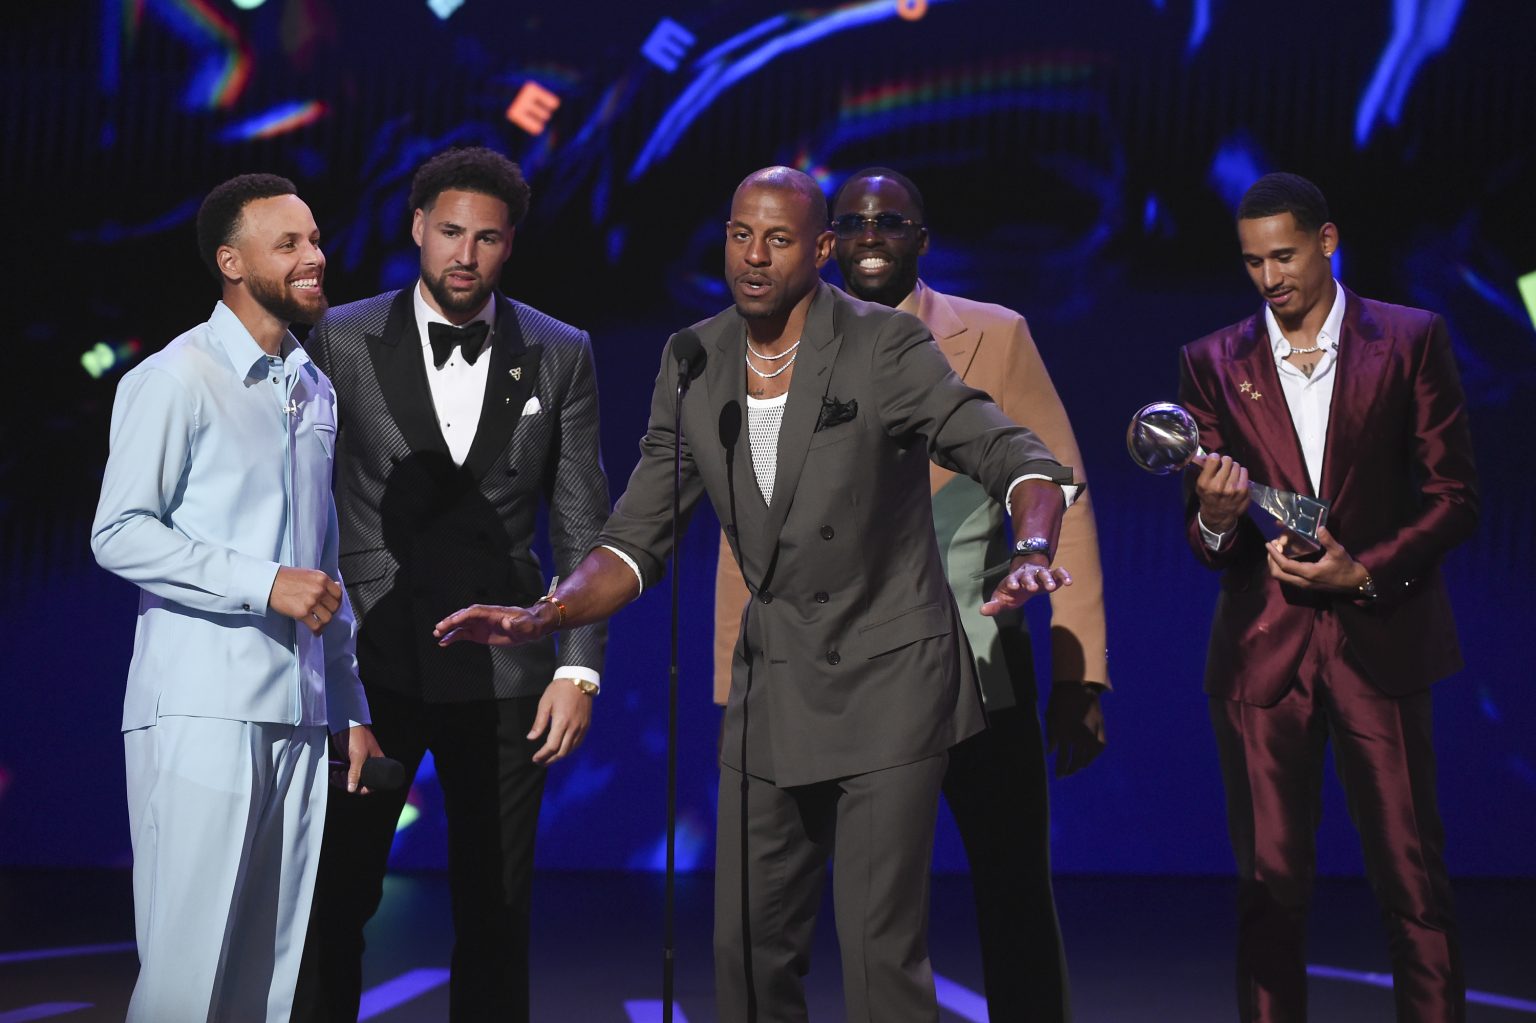 Steph Curry Hosts As Golden State Warriors Win Big At 2022 ESPYS; Full